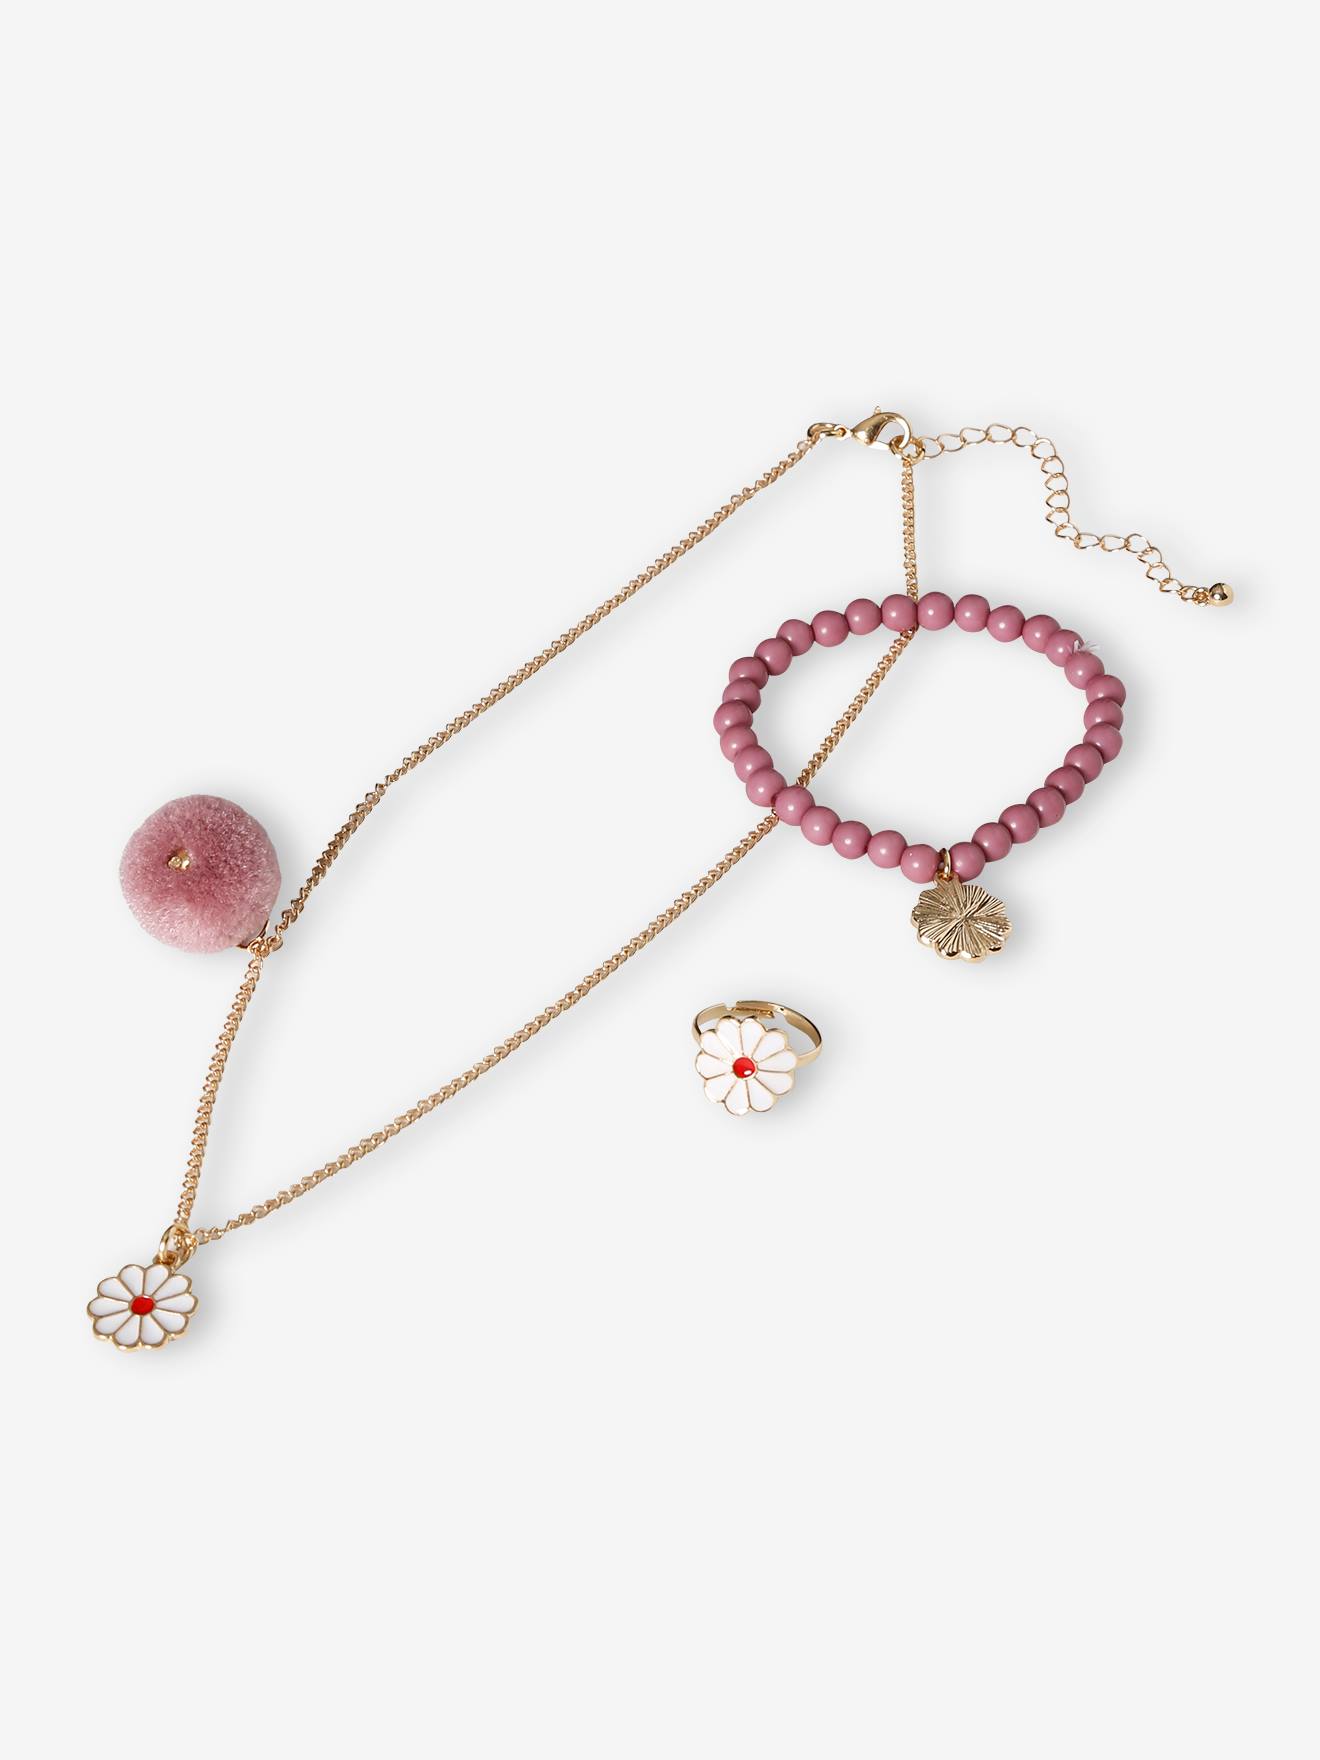 Ketting + armband + ringenset margriet zachtpaars